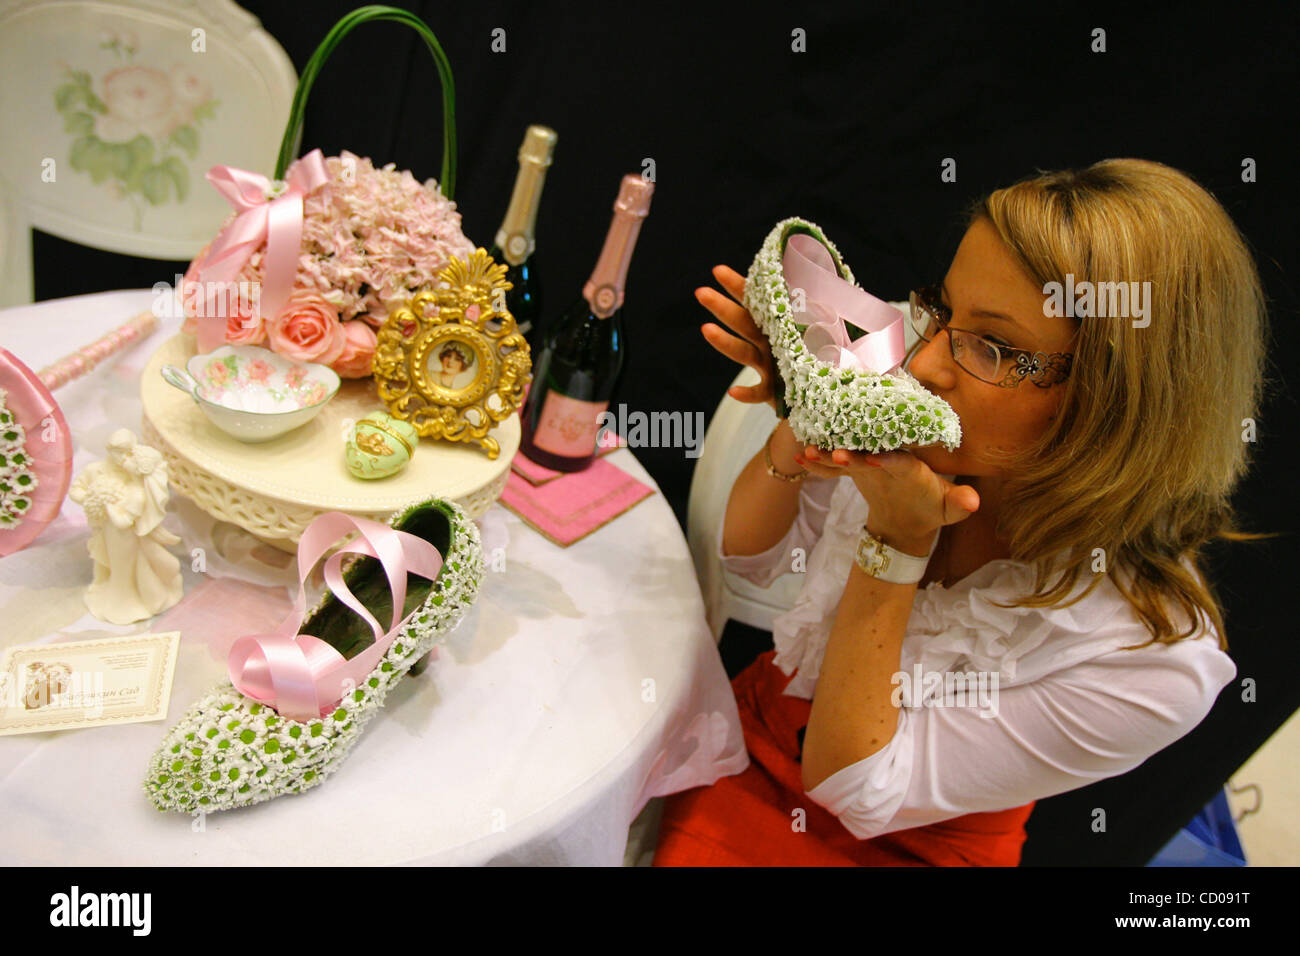 Extravaganza-2008 - Luxury Lifestyle Exhibition in Moscow. Extravaganza is The Premier Showcase of Splendour and Luxury with the very best, most exquisite, products and services for members of the Moscow elite. Pictured: women`s shoes made of flowers Stock Photo